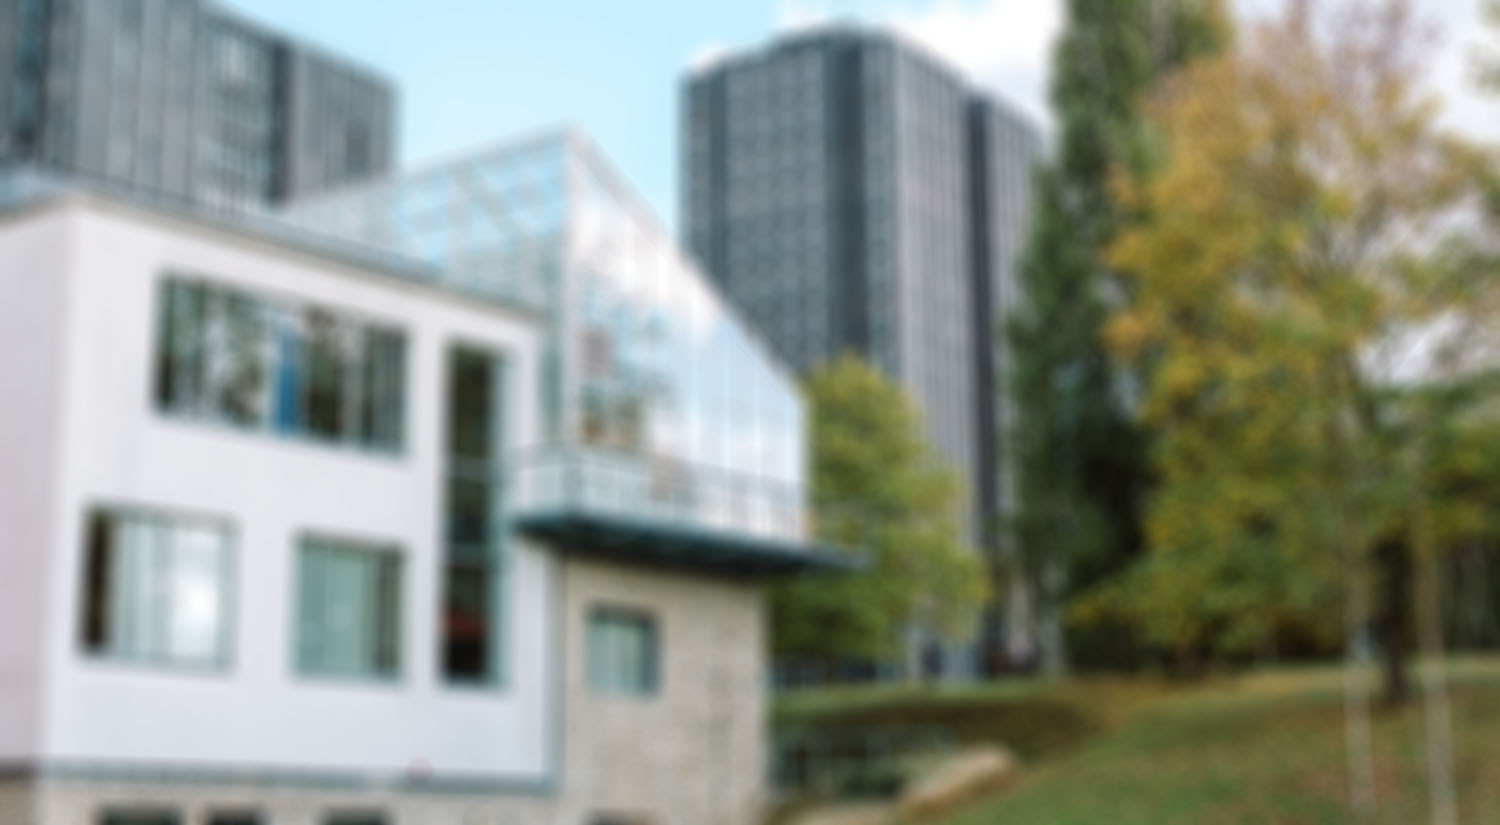 Blurred image of Colchester Campus to highlight the type of image we shouldn't use